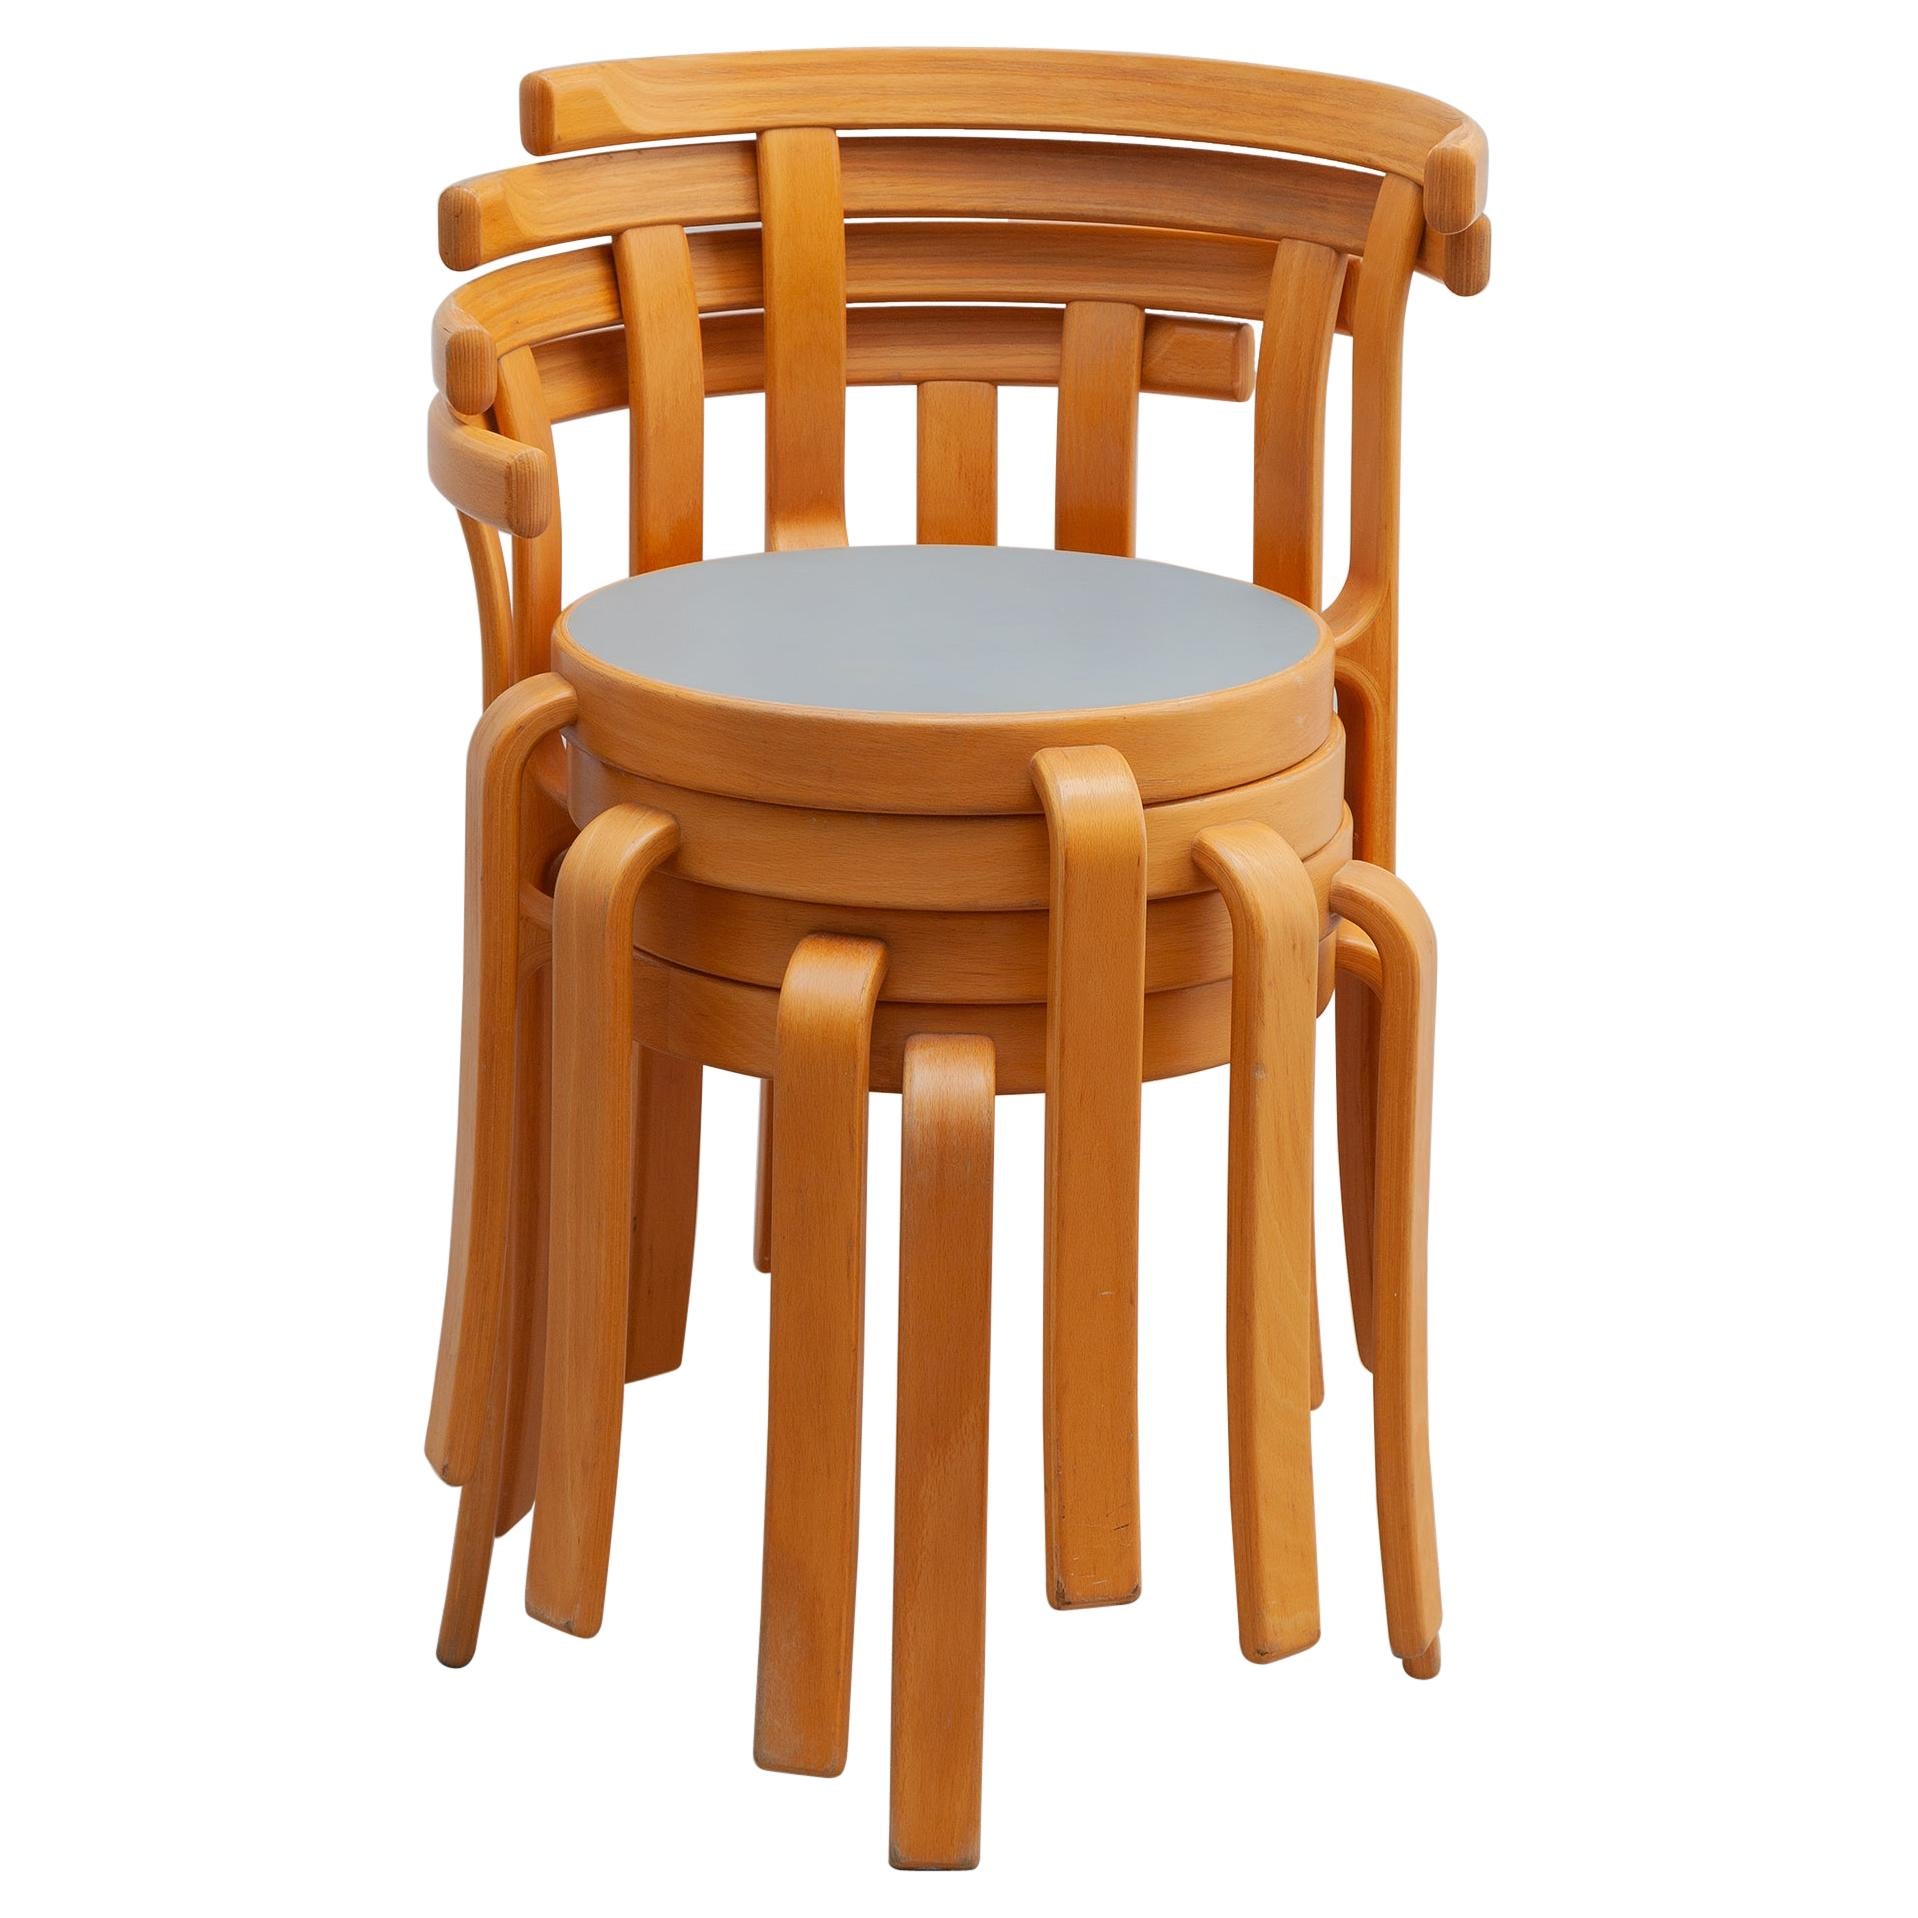 Set of Four Stacking Chairs Designed by Magnus Olesen "8000 Series"